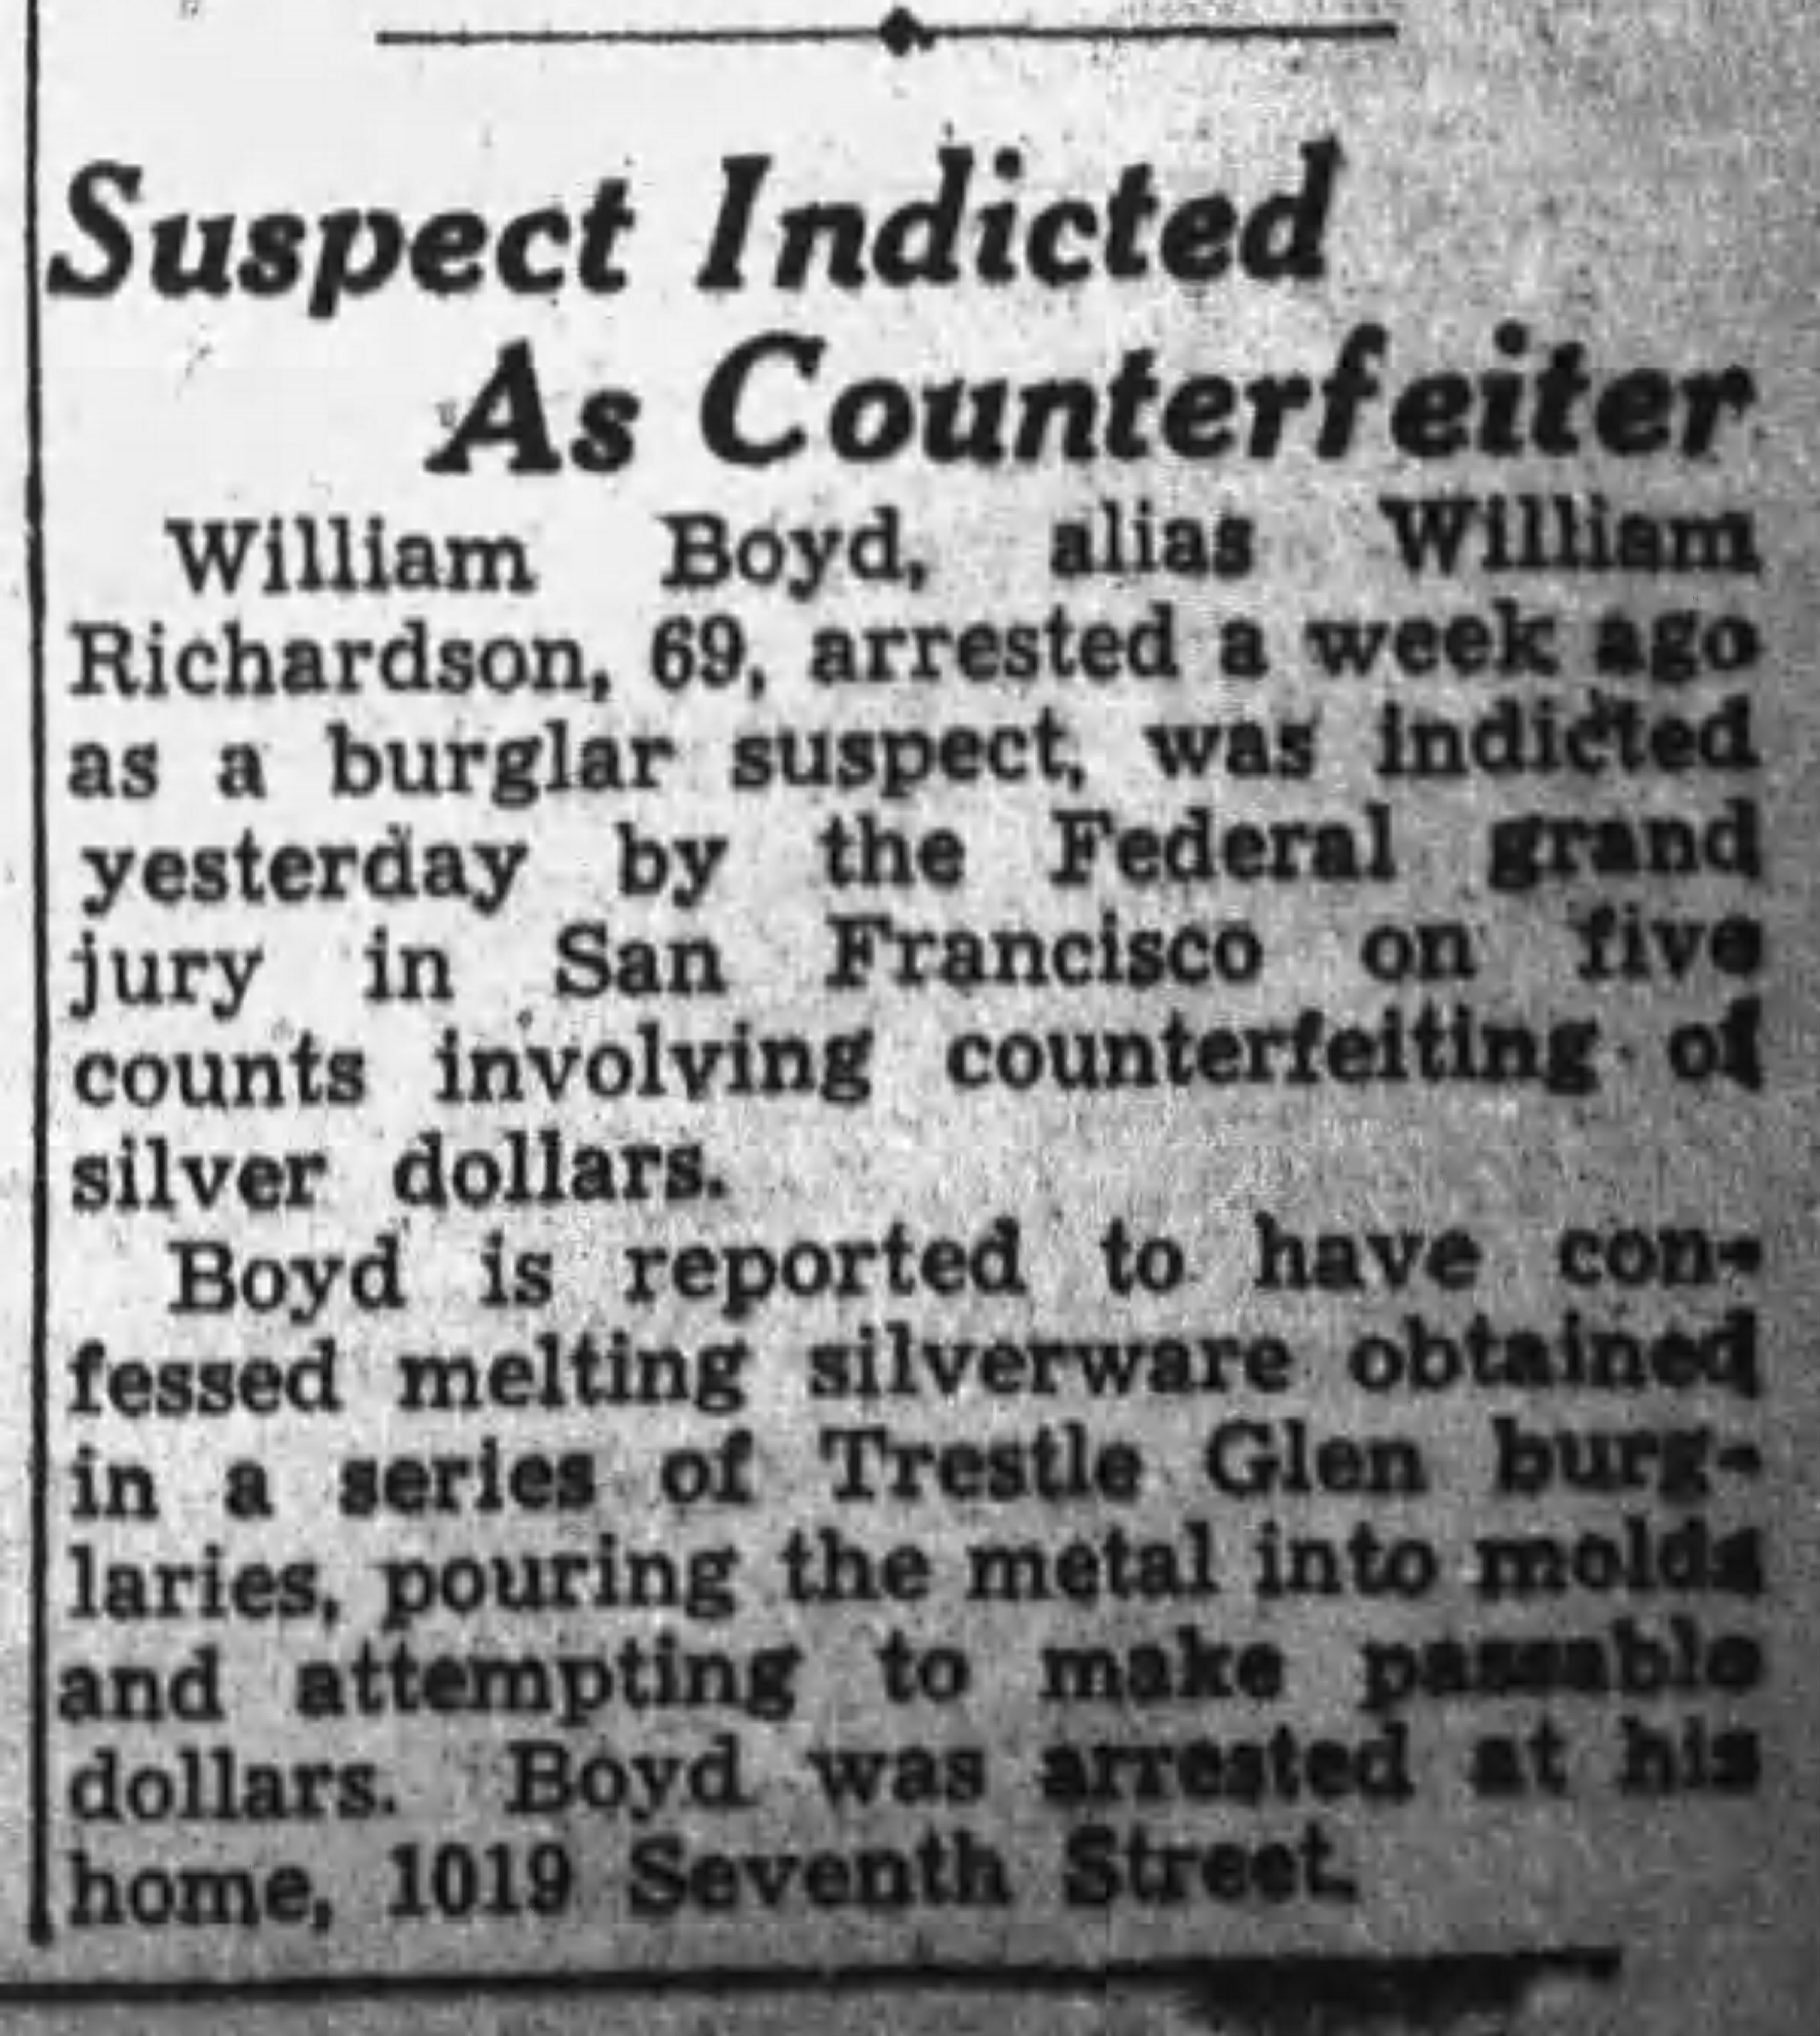 Article about William Boyd alias William Richardson being indicted for five counts of counterfeiting